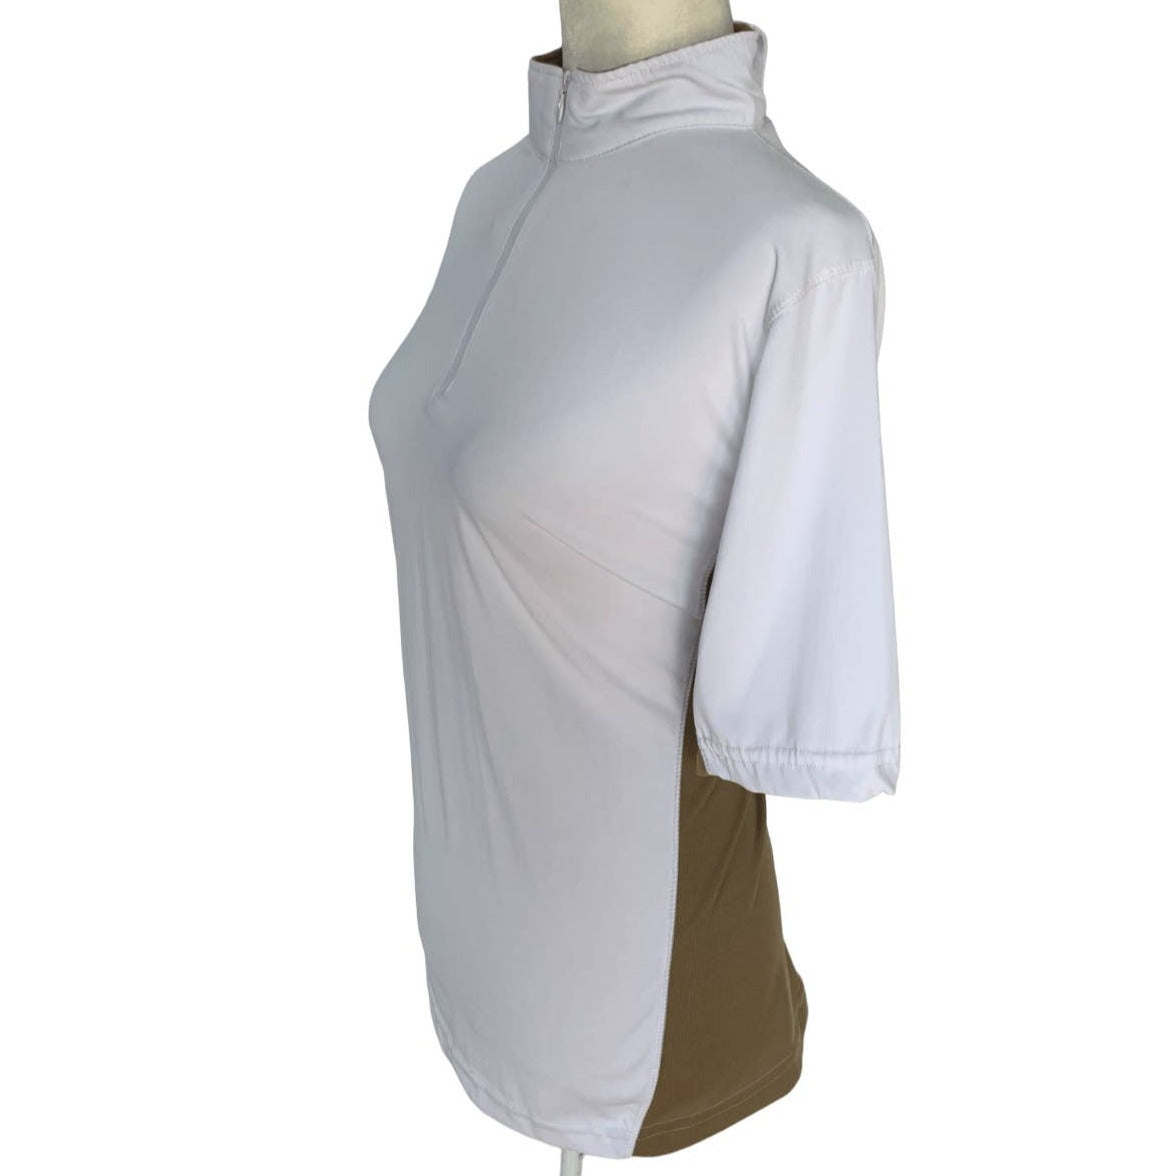 Equine Couture Sportif Riding Shirt in White / Tan - Woman's X-Large